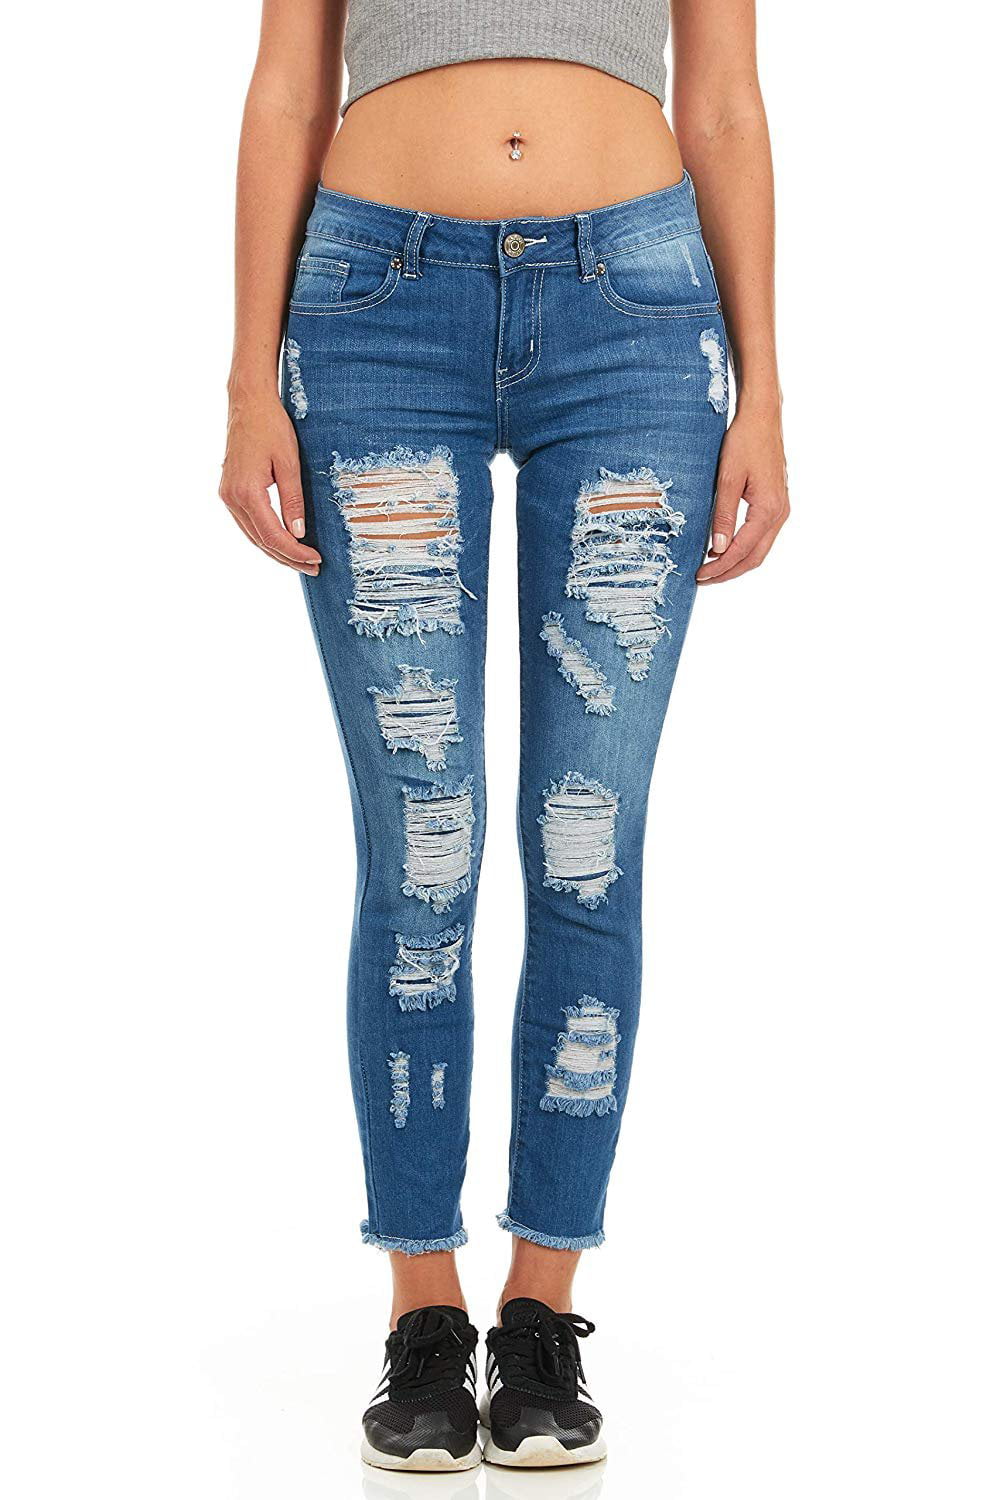 junior girls ripped jeans